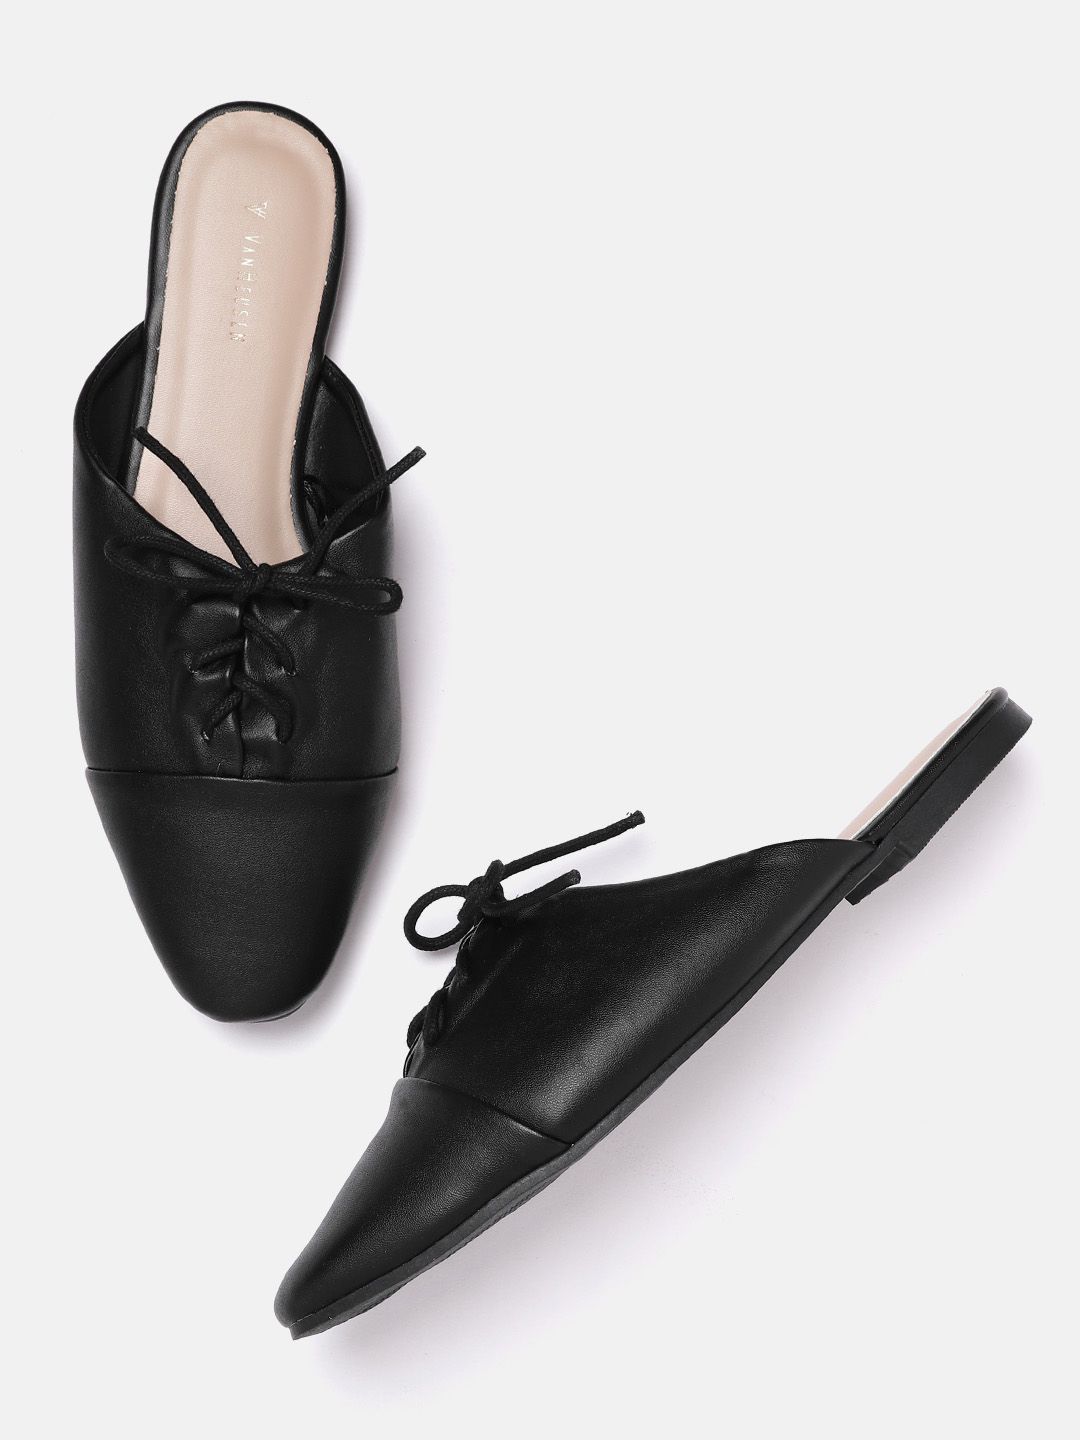 Van Heusen Woman Black Solid Mules with Lace-Up Detail Price in India